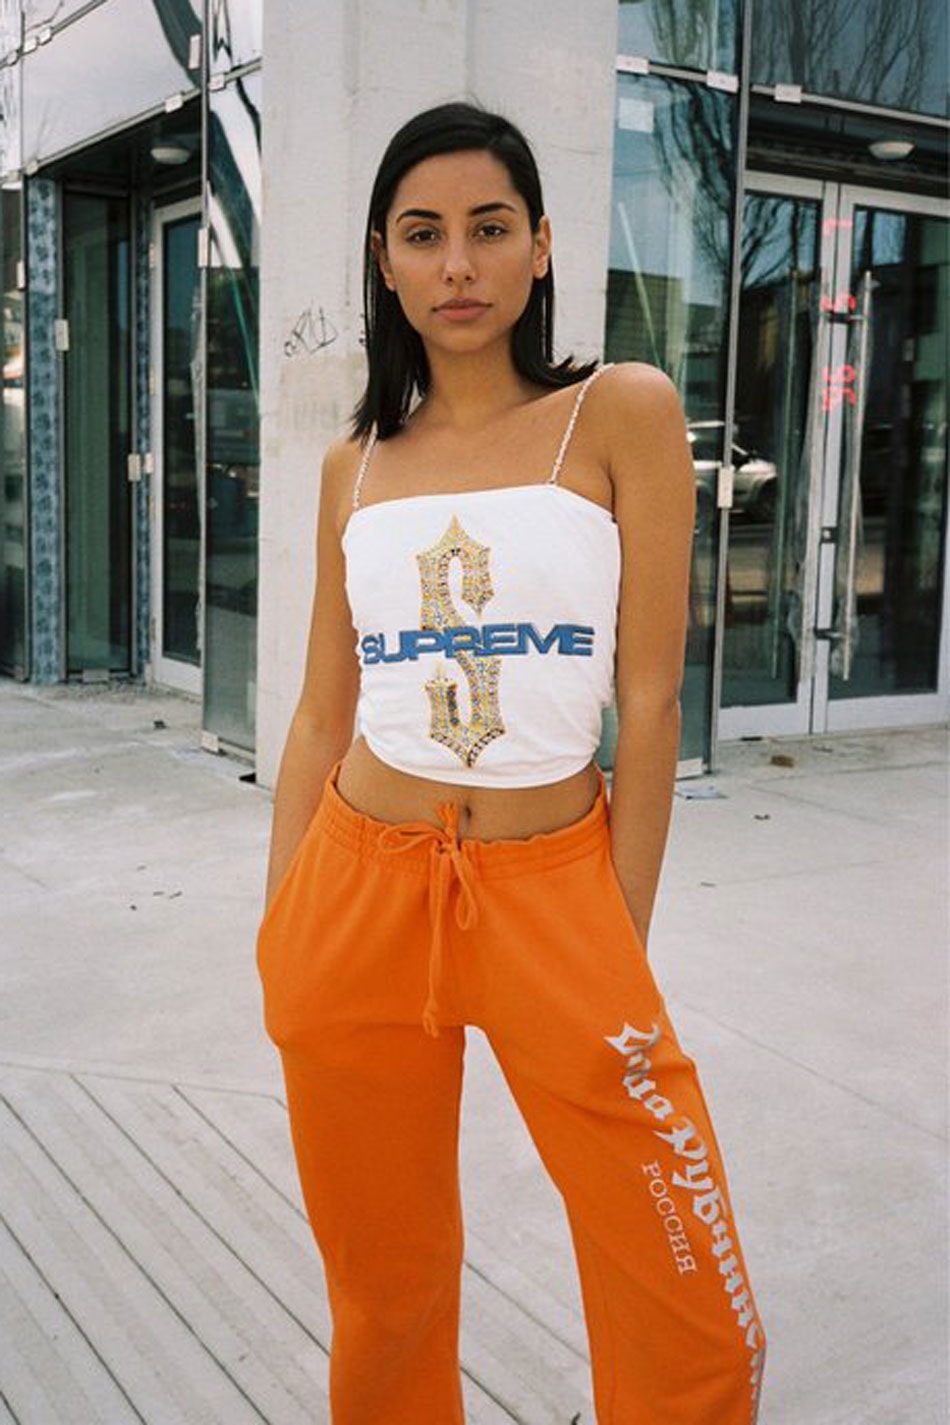 Women Streetwear Brands You Need to Know